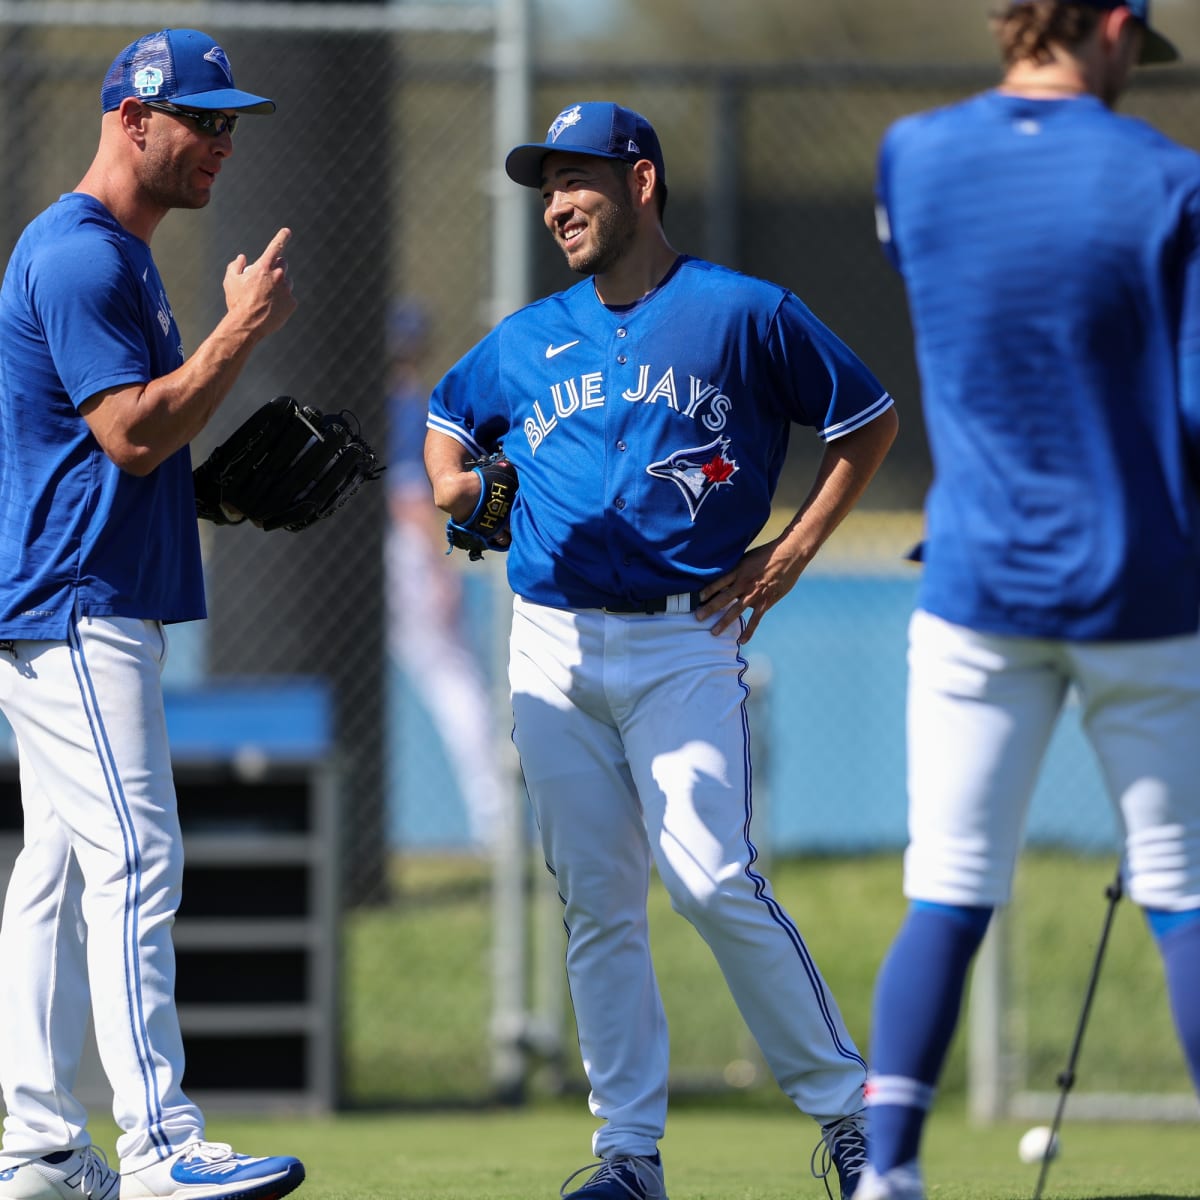 Boys of Summer are back': Blue Jays players arrive ahead of spring